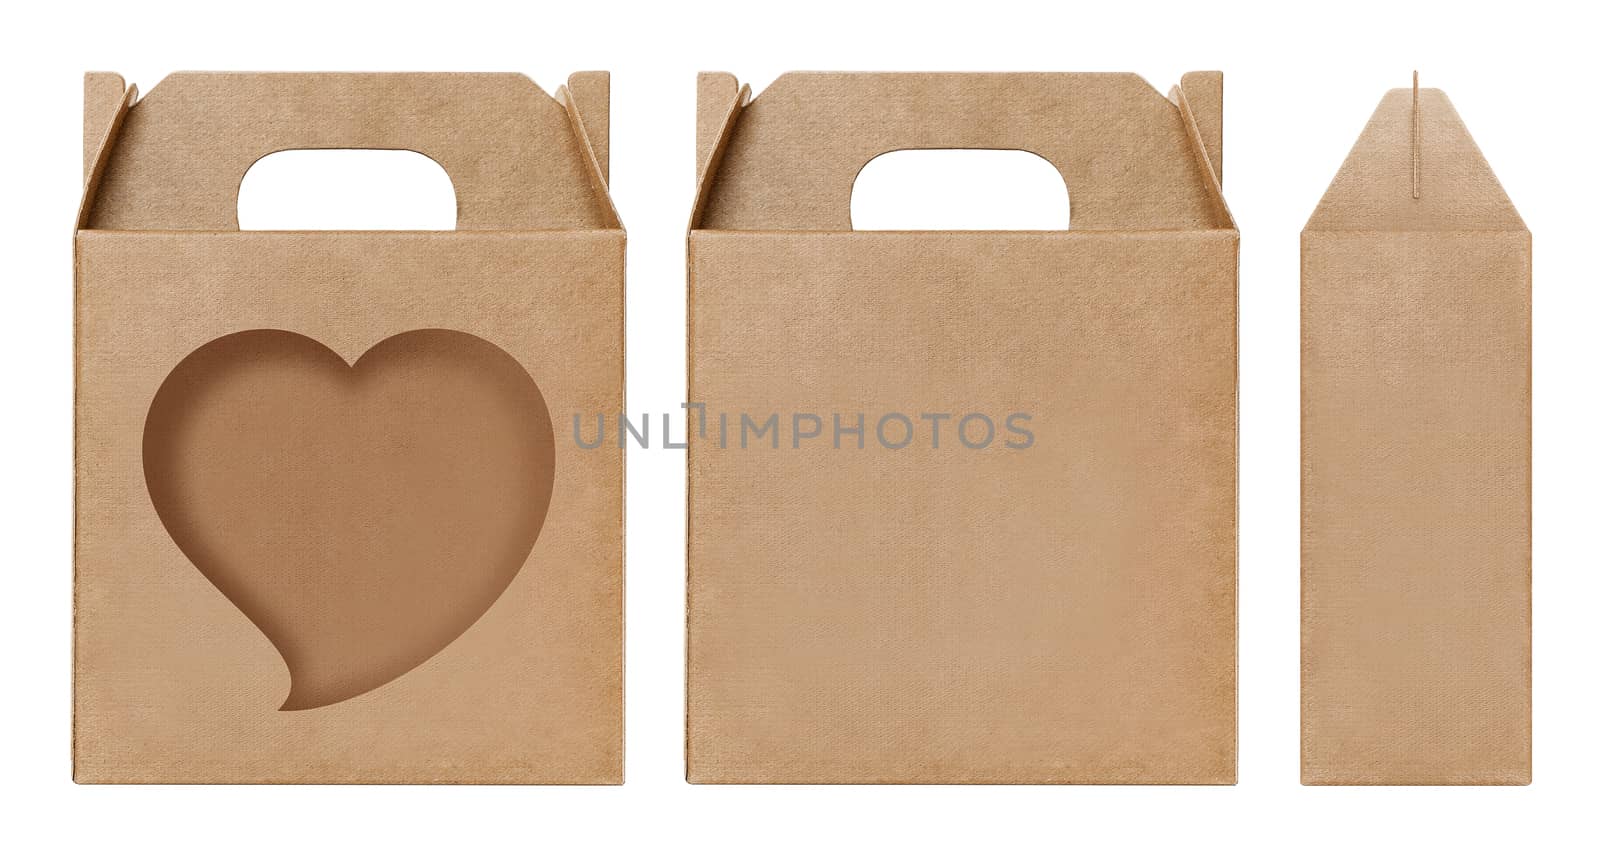 Box brown window Heart shape cut out Packaging template, Empty kraft Box Cardboard isolated white background, Boxes Paper kraft natural material, Gift Box Brown Paper from Industrial Packaging carton by cgdeaw